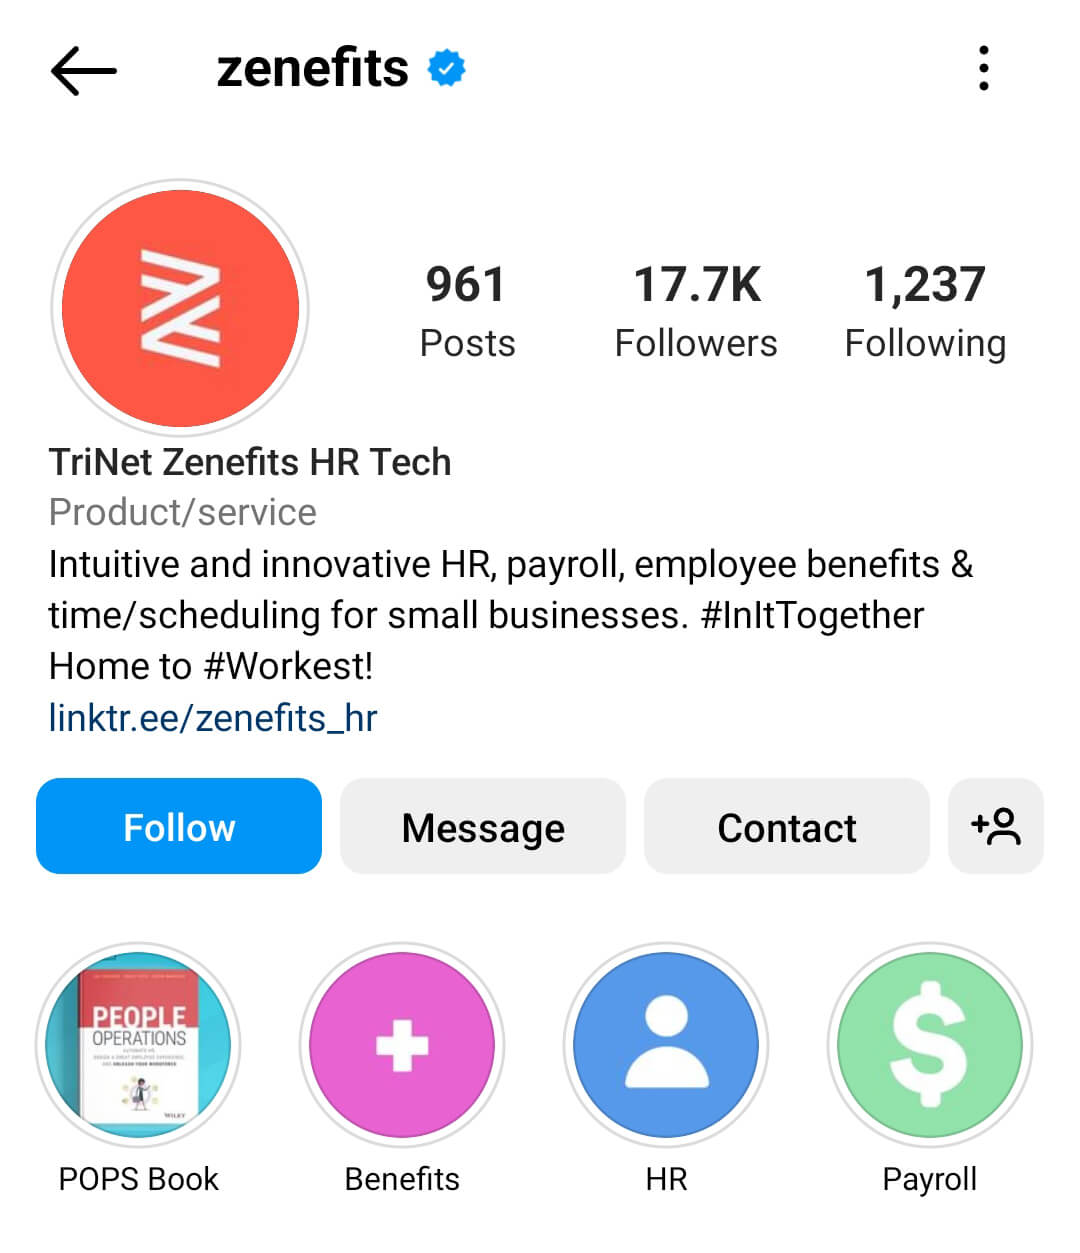 how-to-set-up-your-instagram-profile-for-brand-recognition-and-engagement-bio-links-to-landing-page-with-resources-for-demo-toolkits-ebooks-branded-hashtags-zenefits-example-2